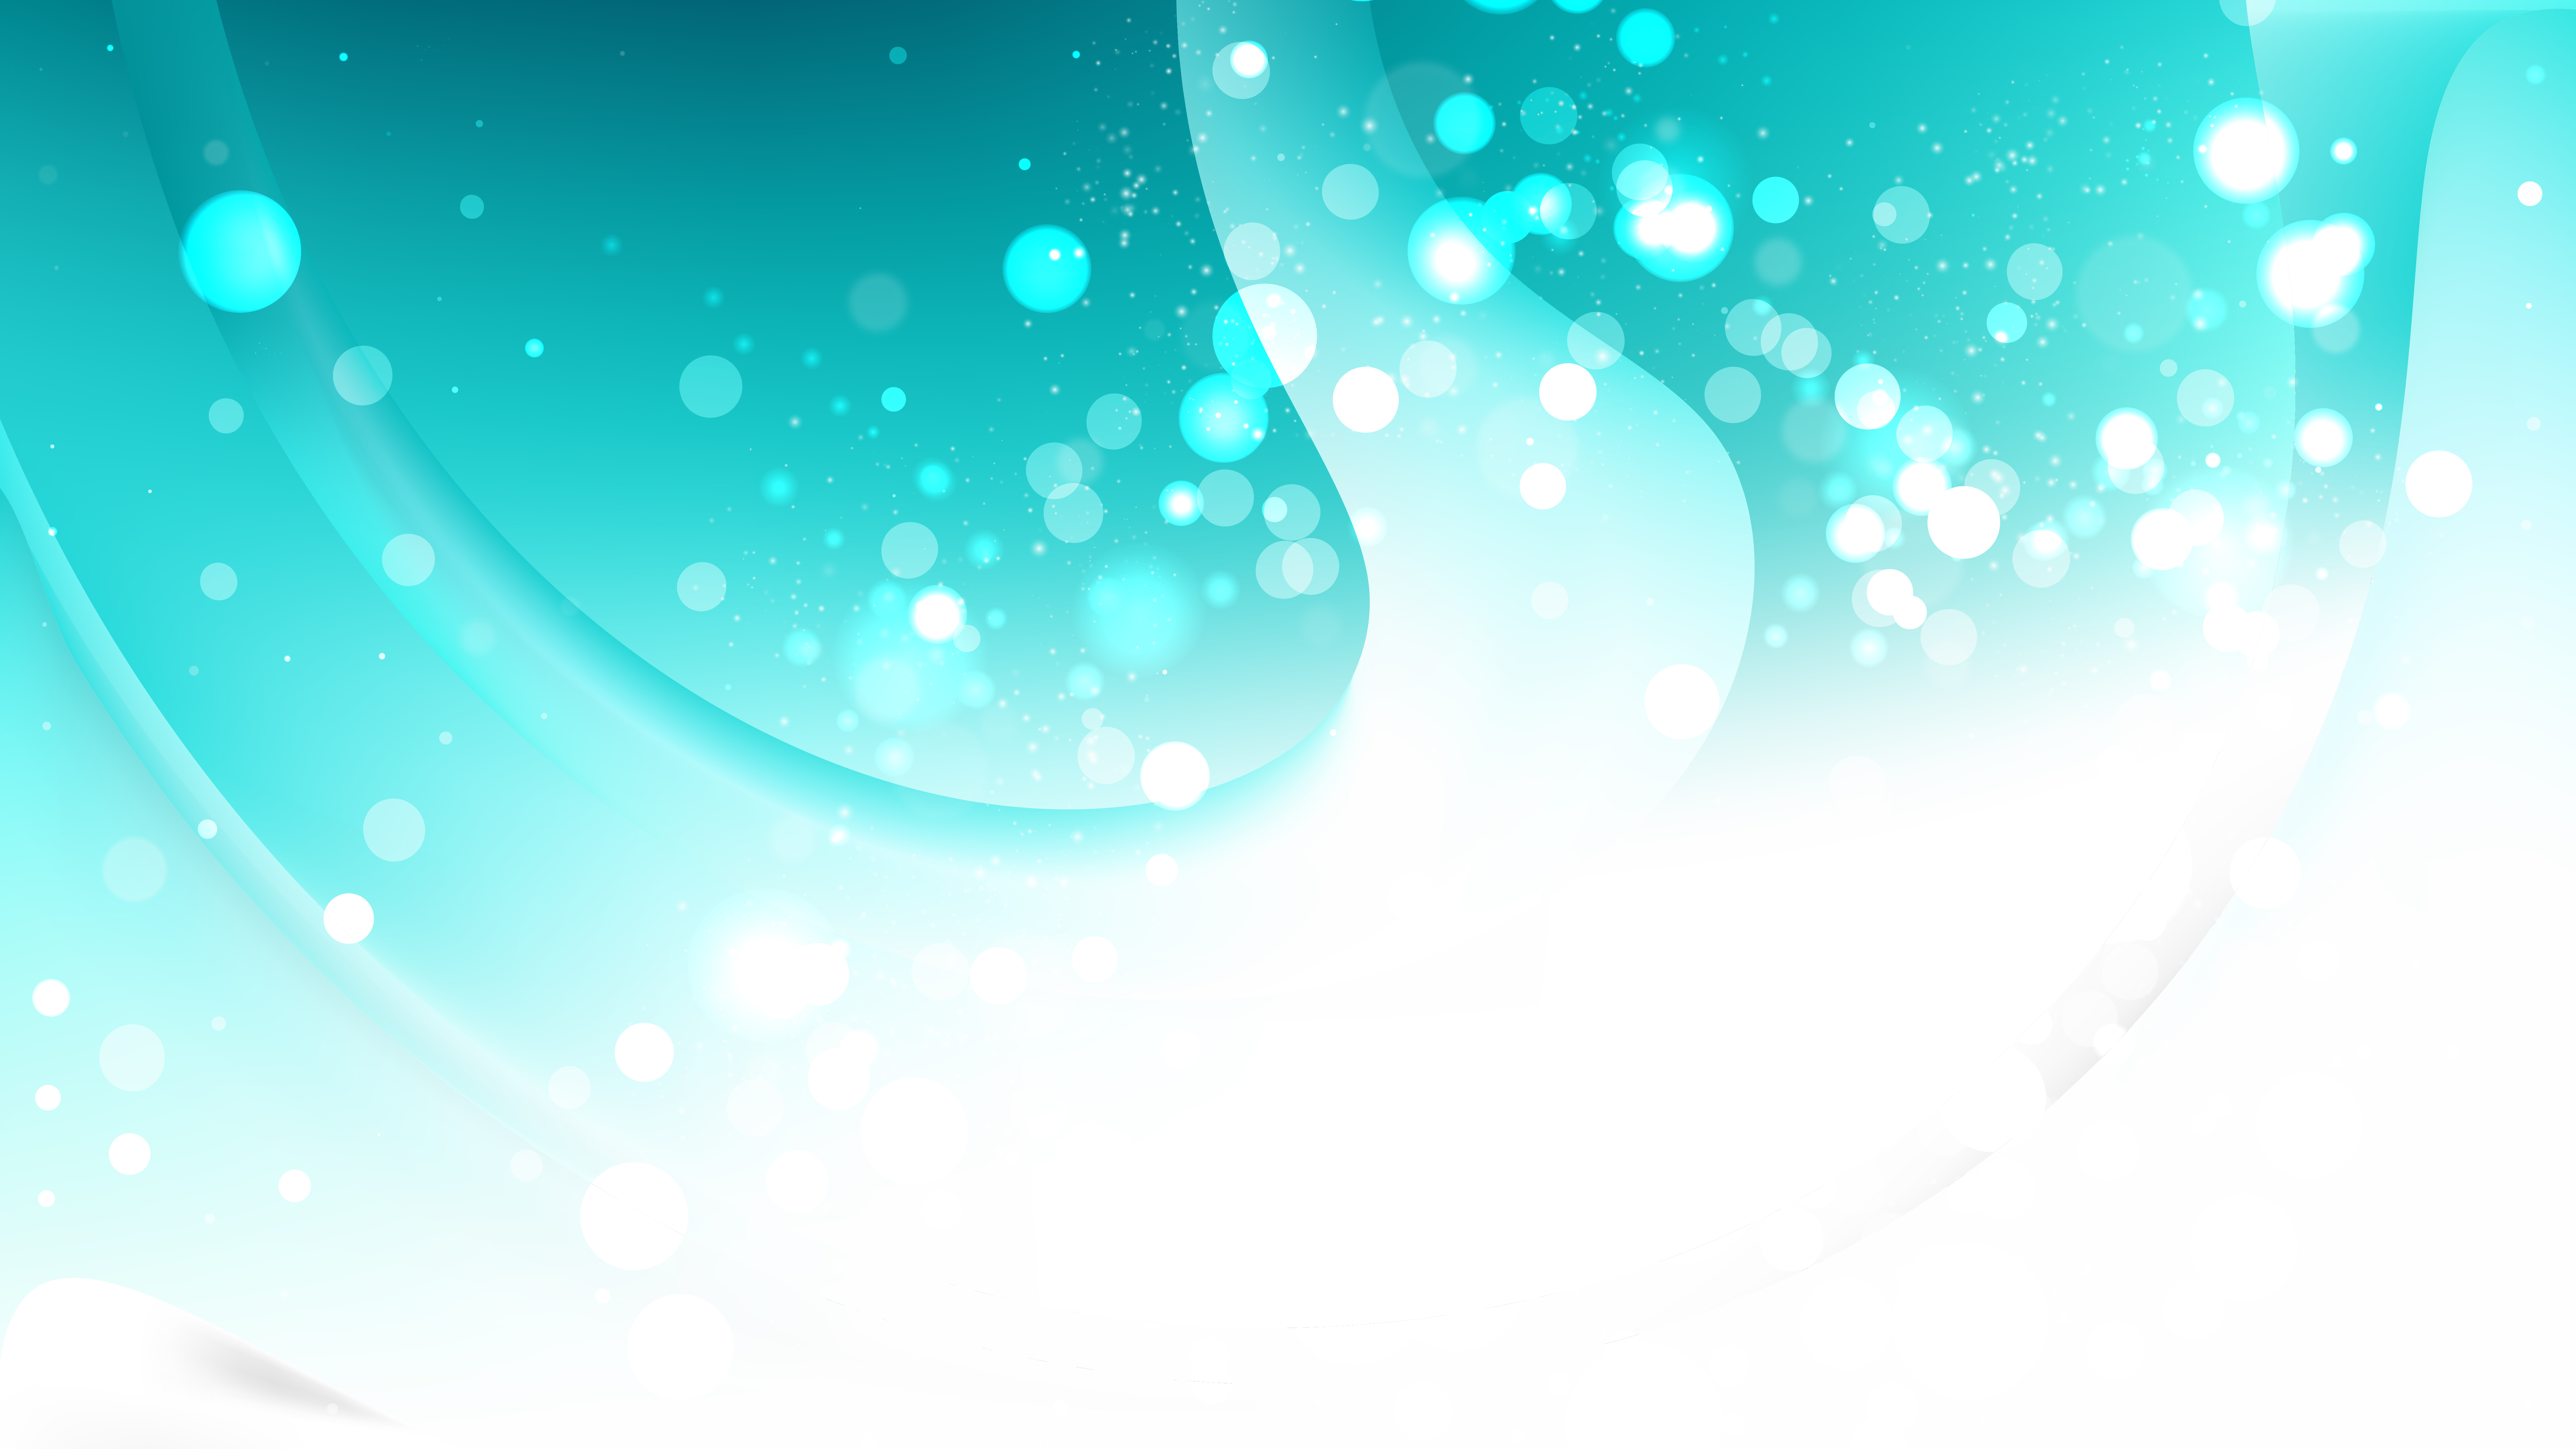 Abstract Turquoise And White Defocused Background Design